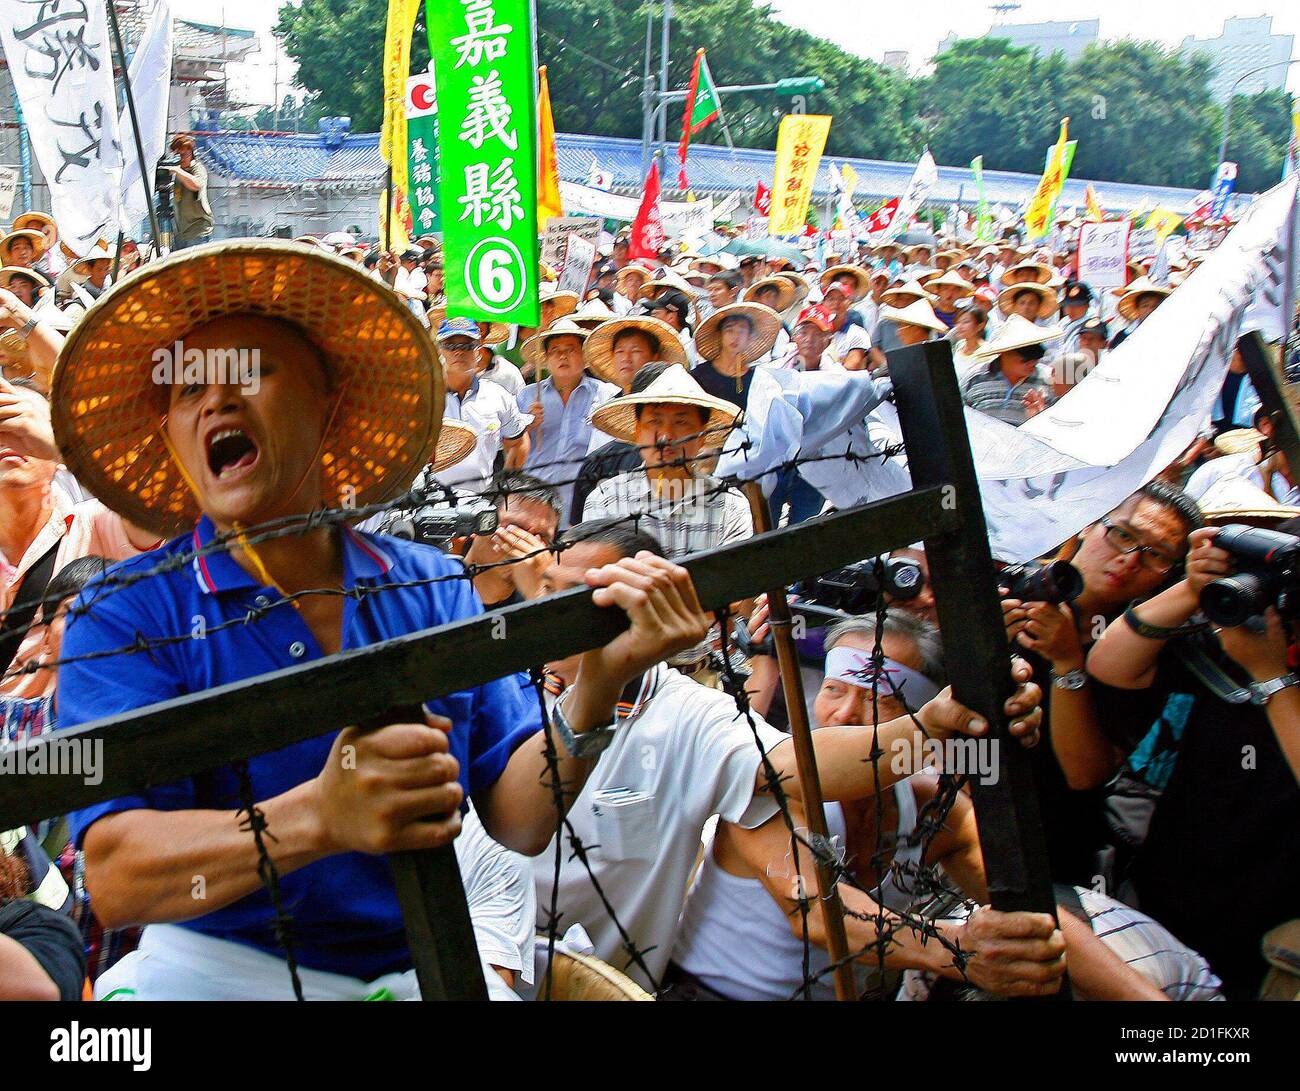 A pig farmer shouts as he climbs over a barricade during a demonstration in front of the Department of Health in Taipei August 21, 2007. Taiwan's government is to retain the ban on local use of ractopamine, an animal drug, while allowing foreign imports containing the same substance to enter Taiwan.   REUTERS/Nicky Loh (TAIWAN) Stock Photo